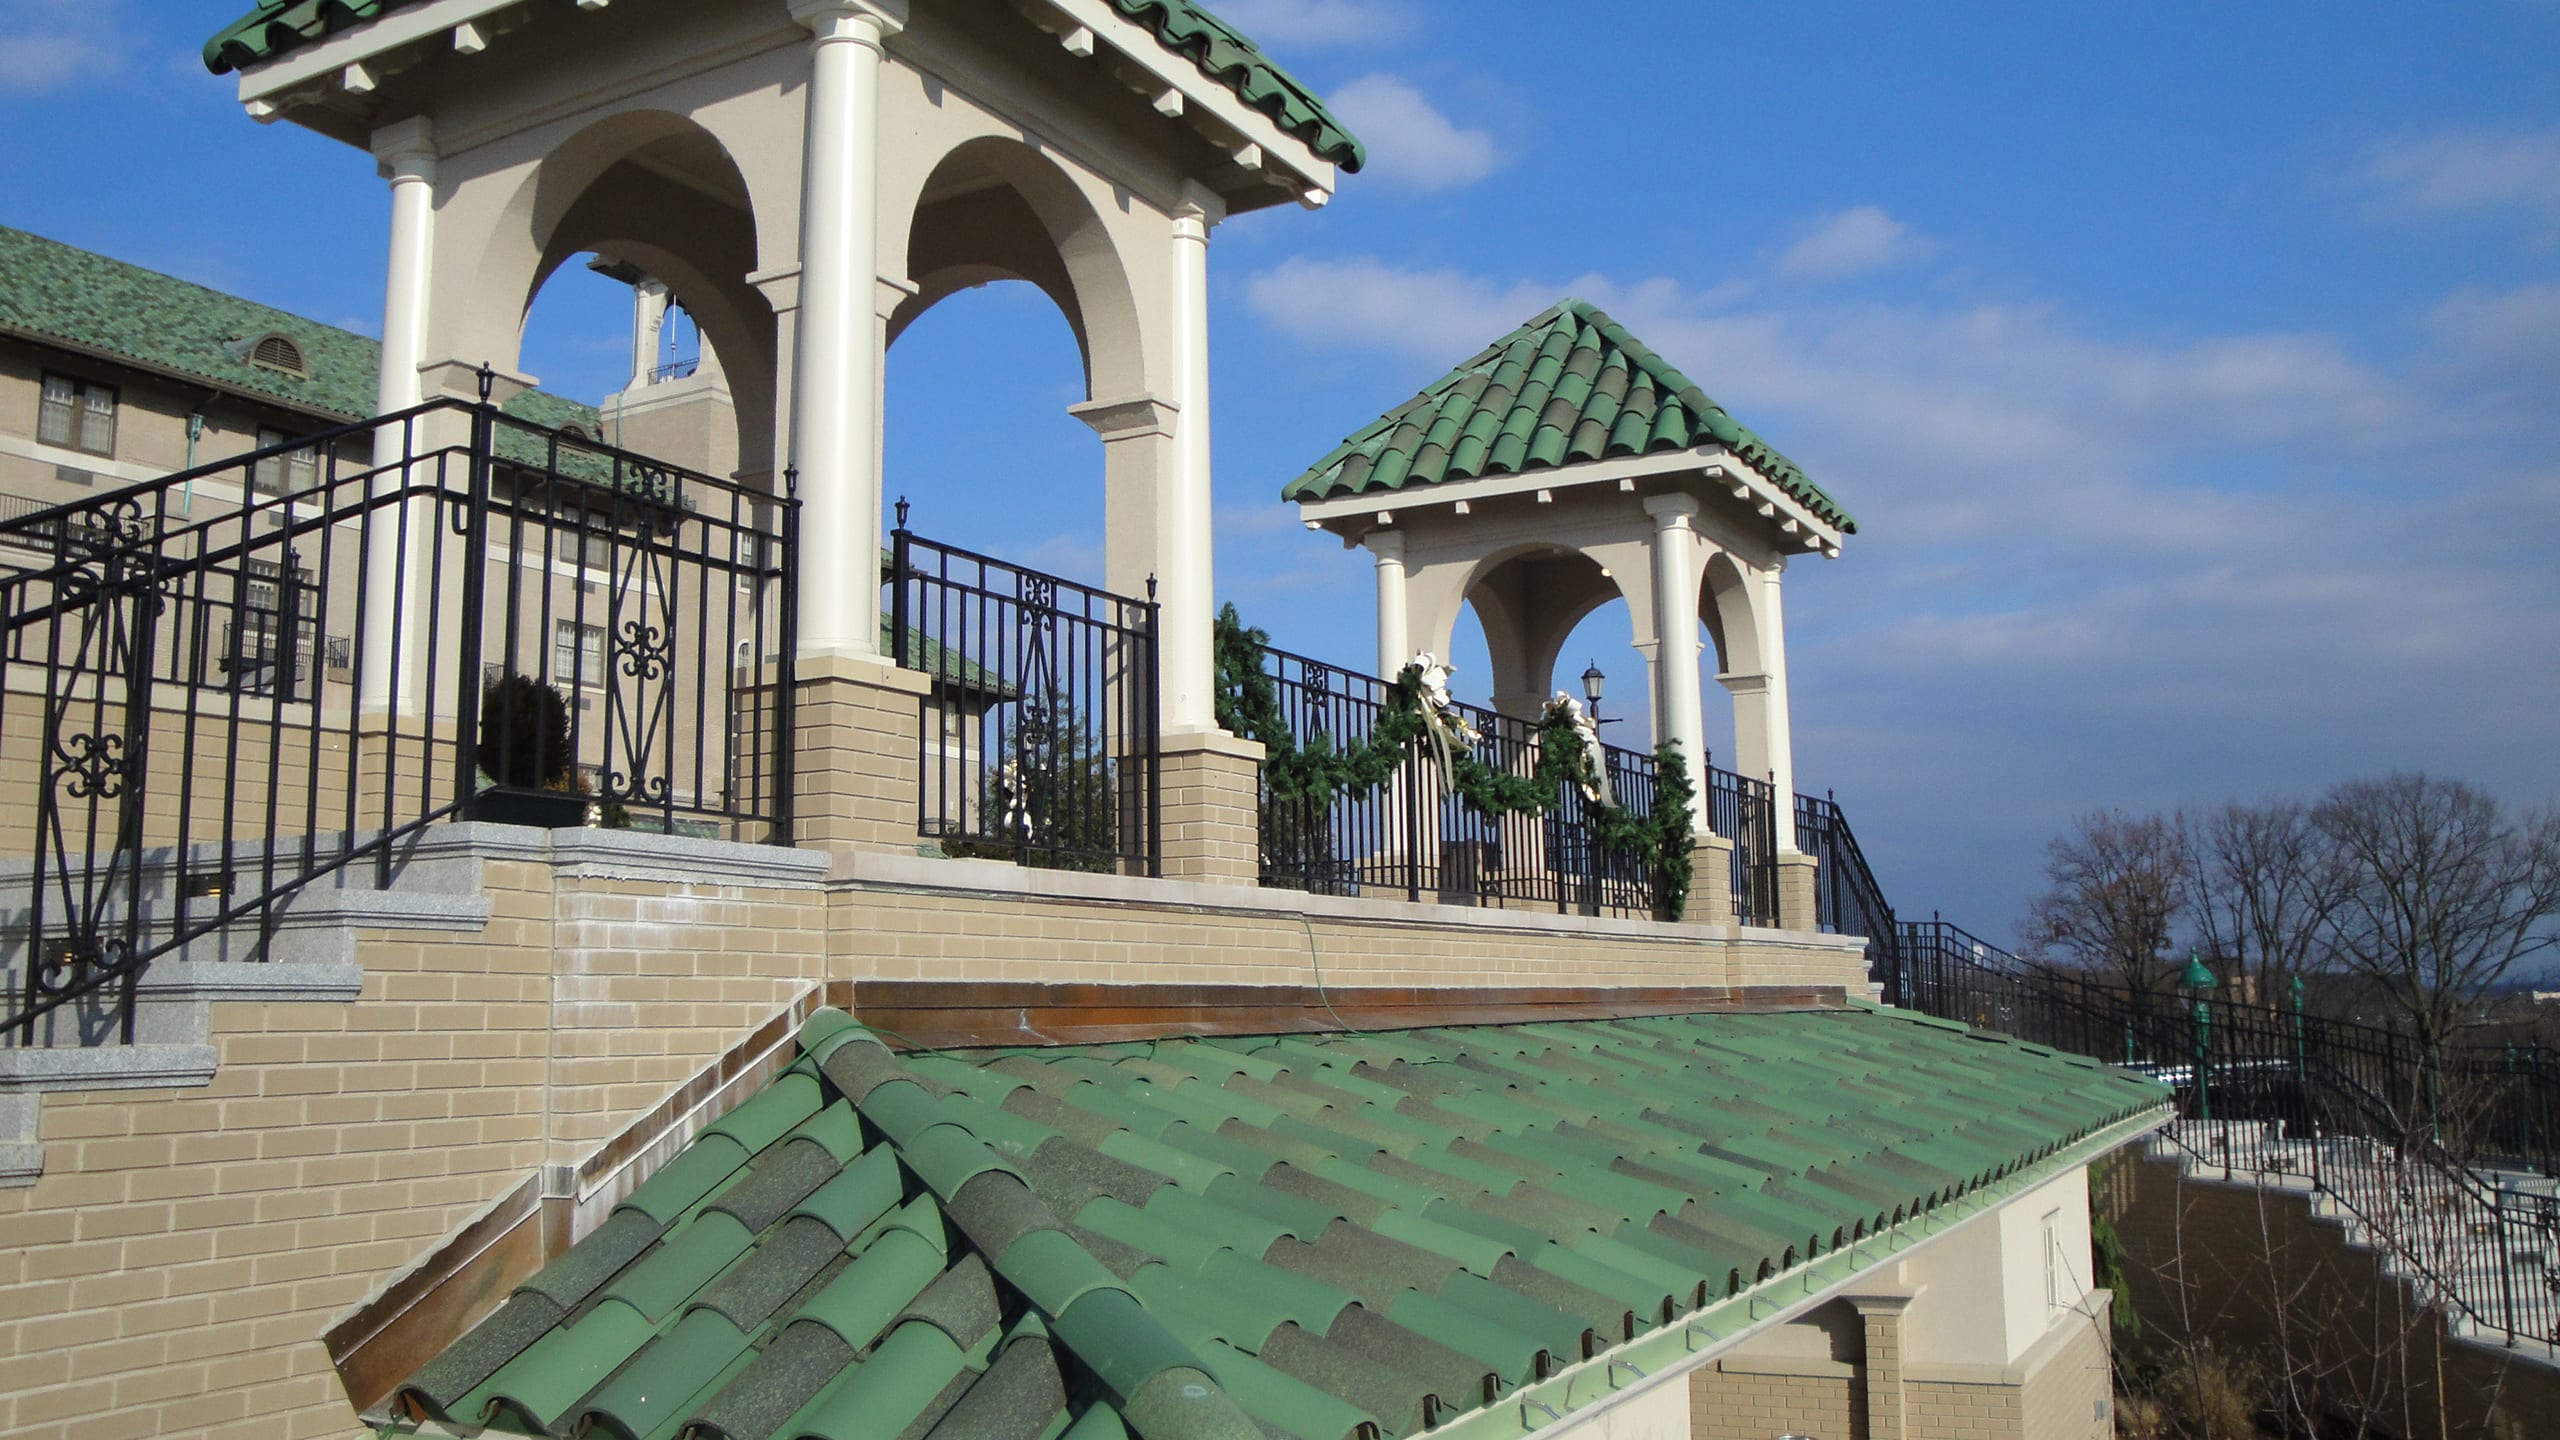 Hotel Hershey Featuring Ludowici Clay Roof Tile